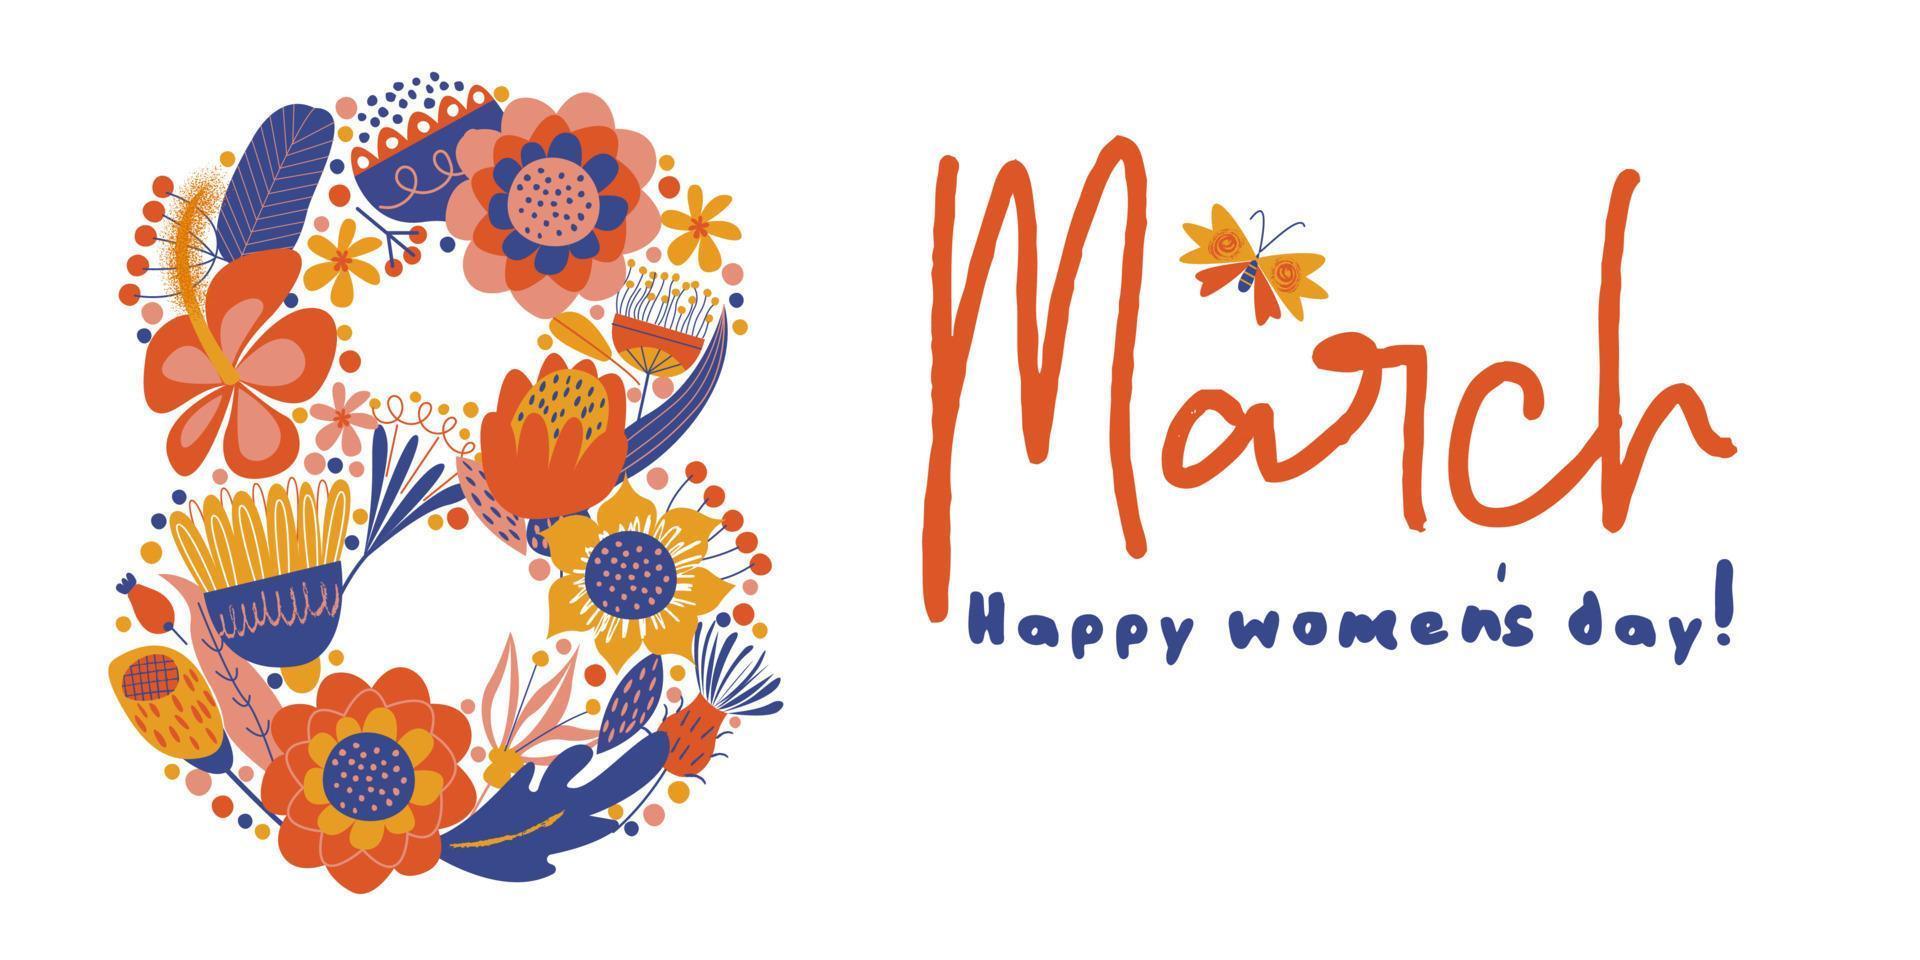 Greeting card, banner for the international women's day on March 8. Vector illustration on a white background.